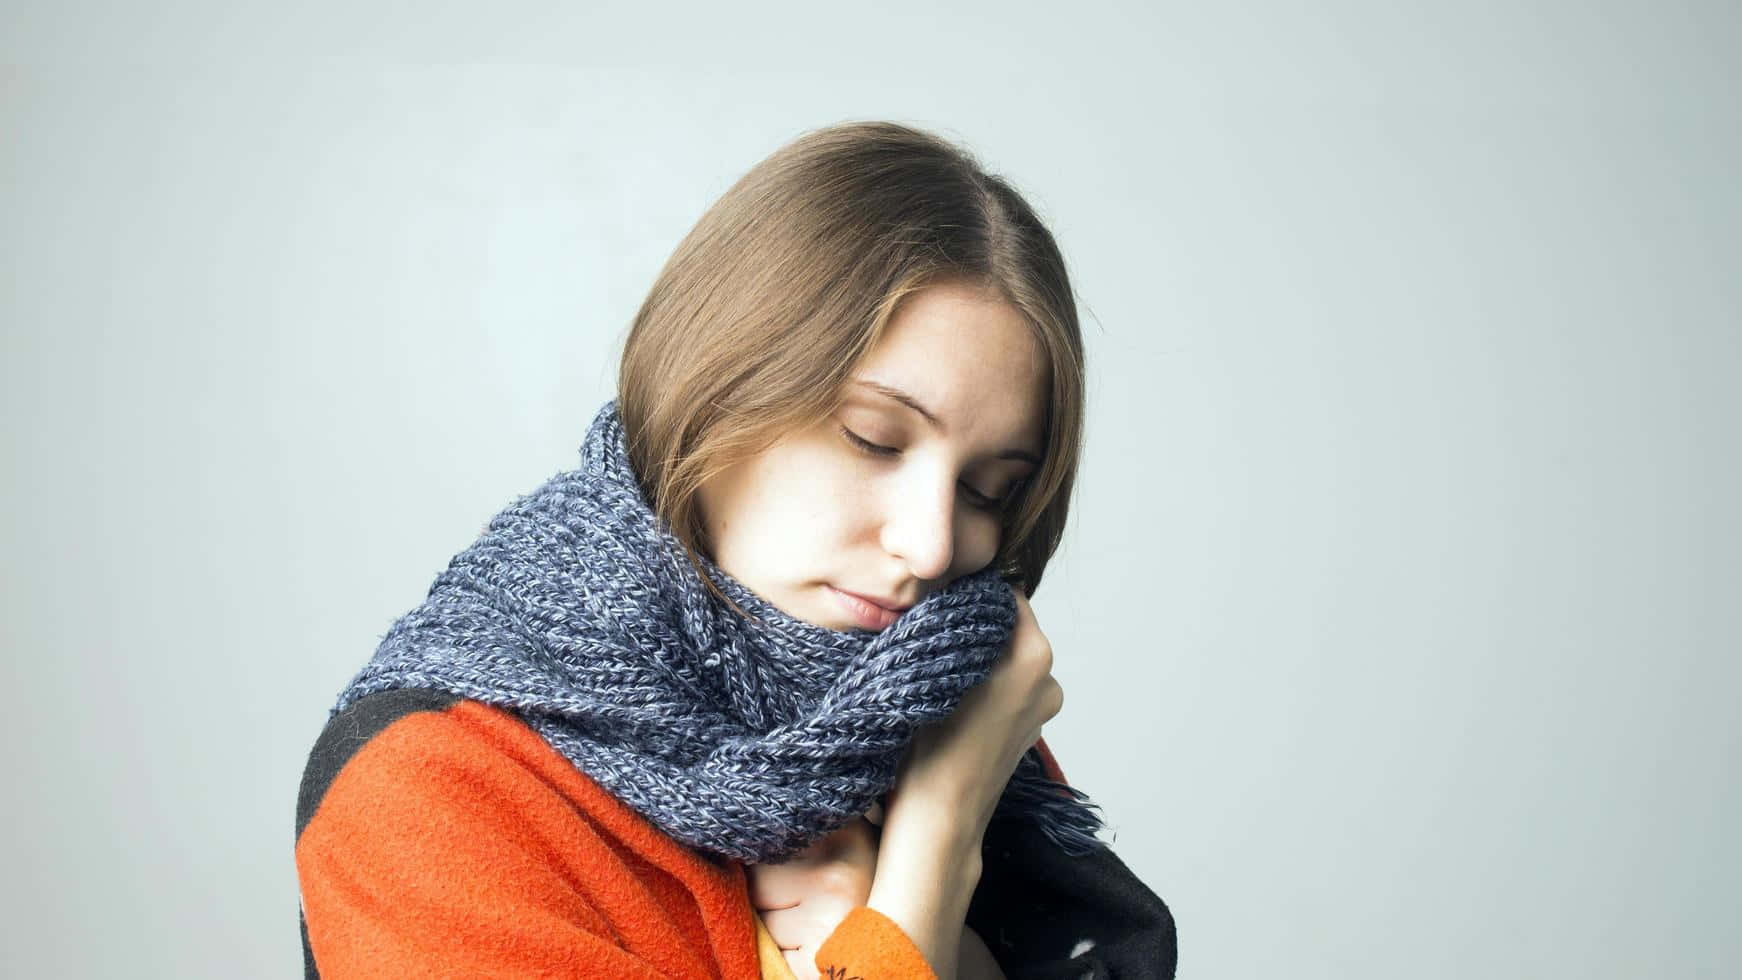 Shivering Woman Holding Scarf [wallpaper] Wallpaper